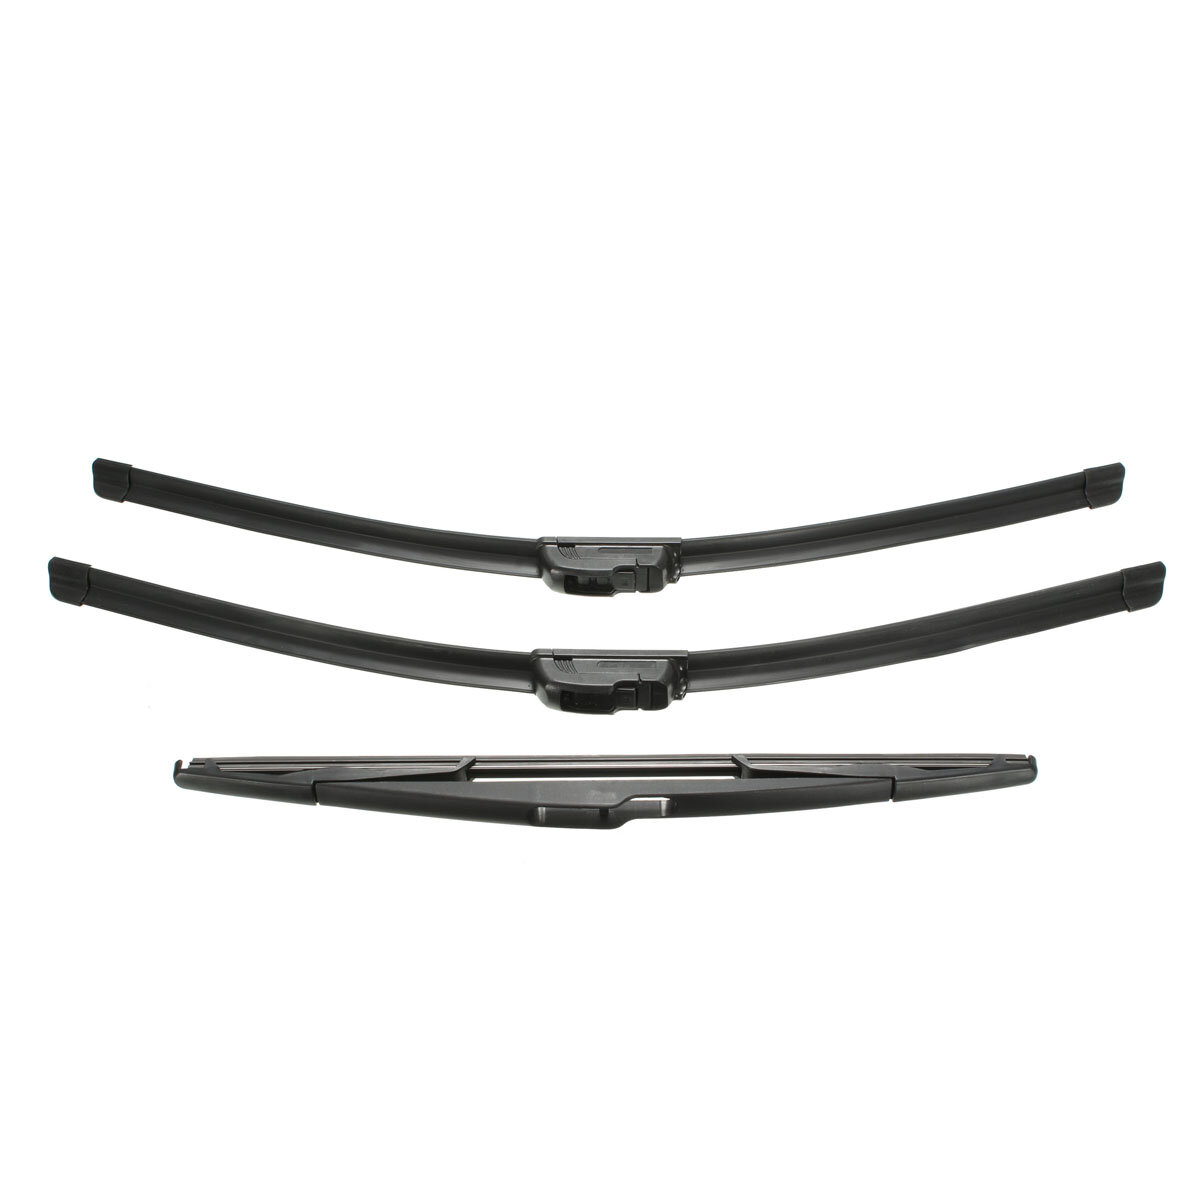 Front And Rear Side Windscreen Window Wiper Blades For Peugeot 206 98-10, Banggood  - buy with discount